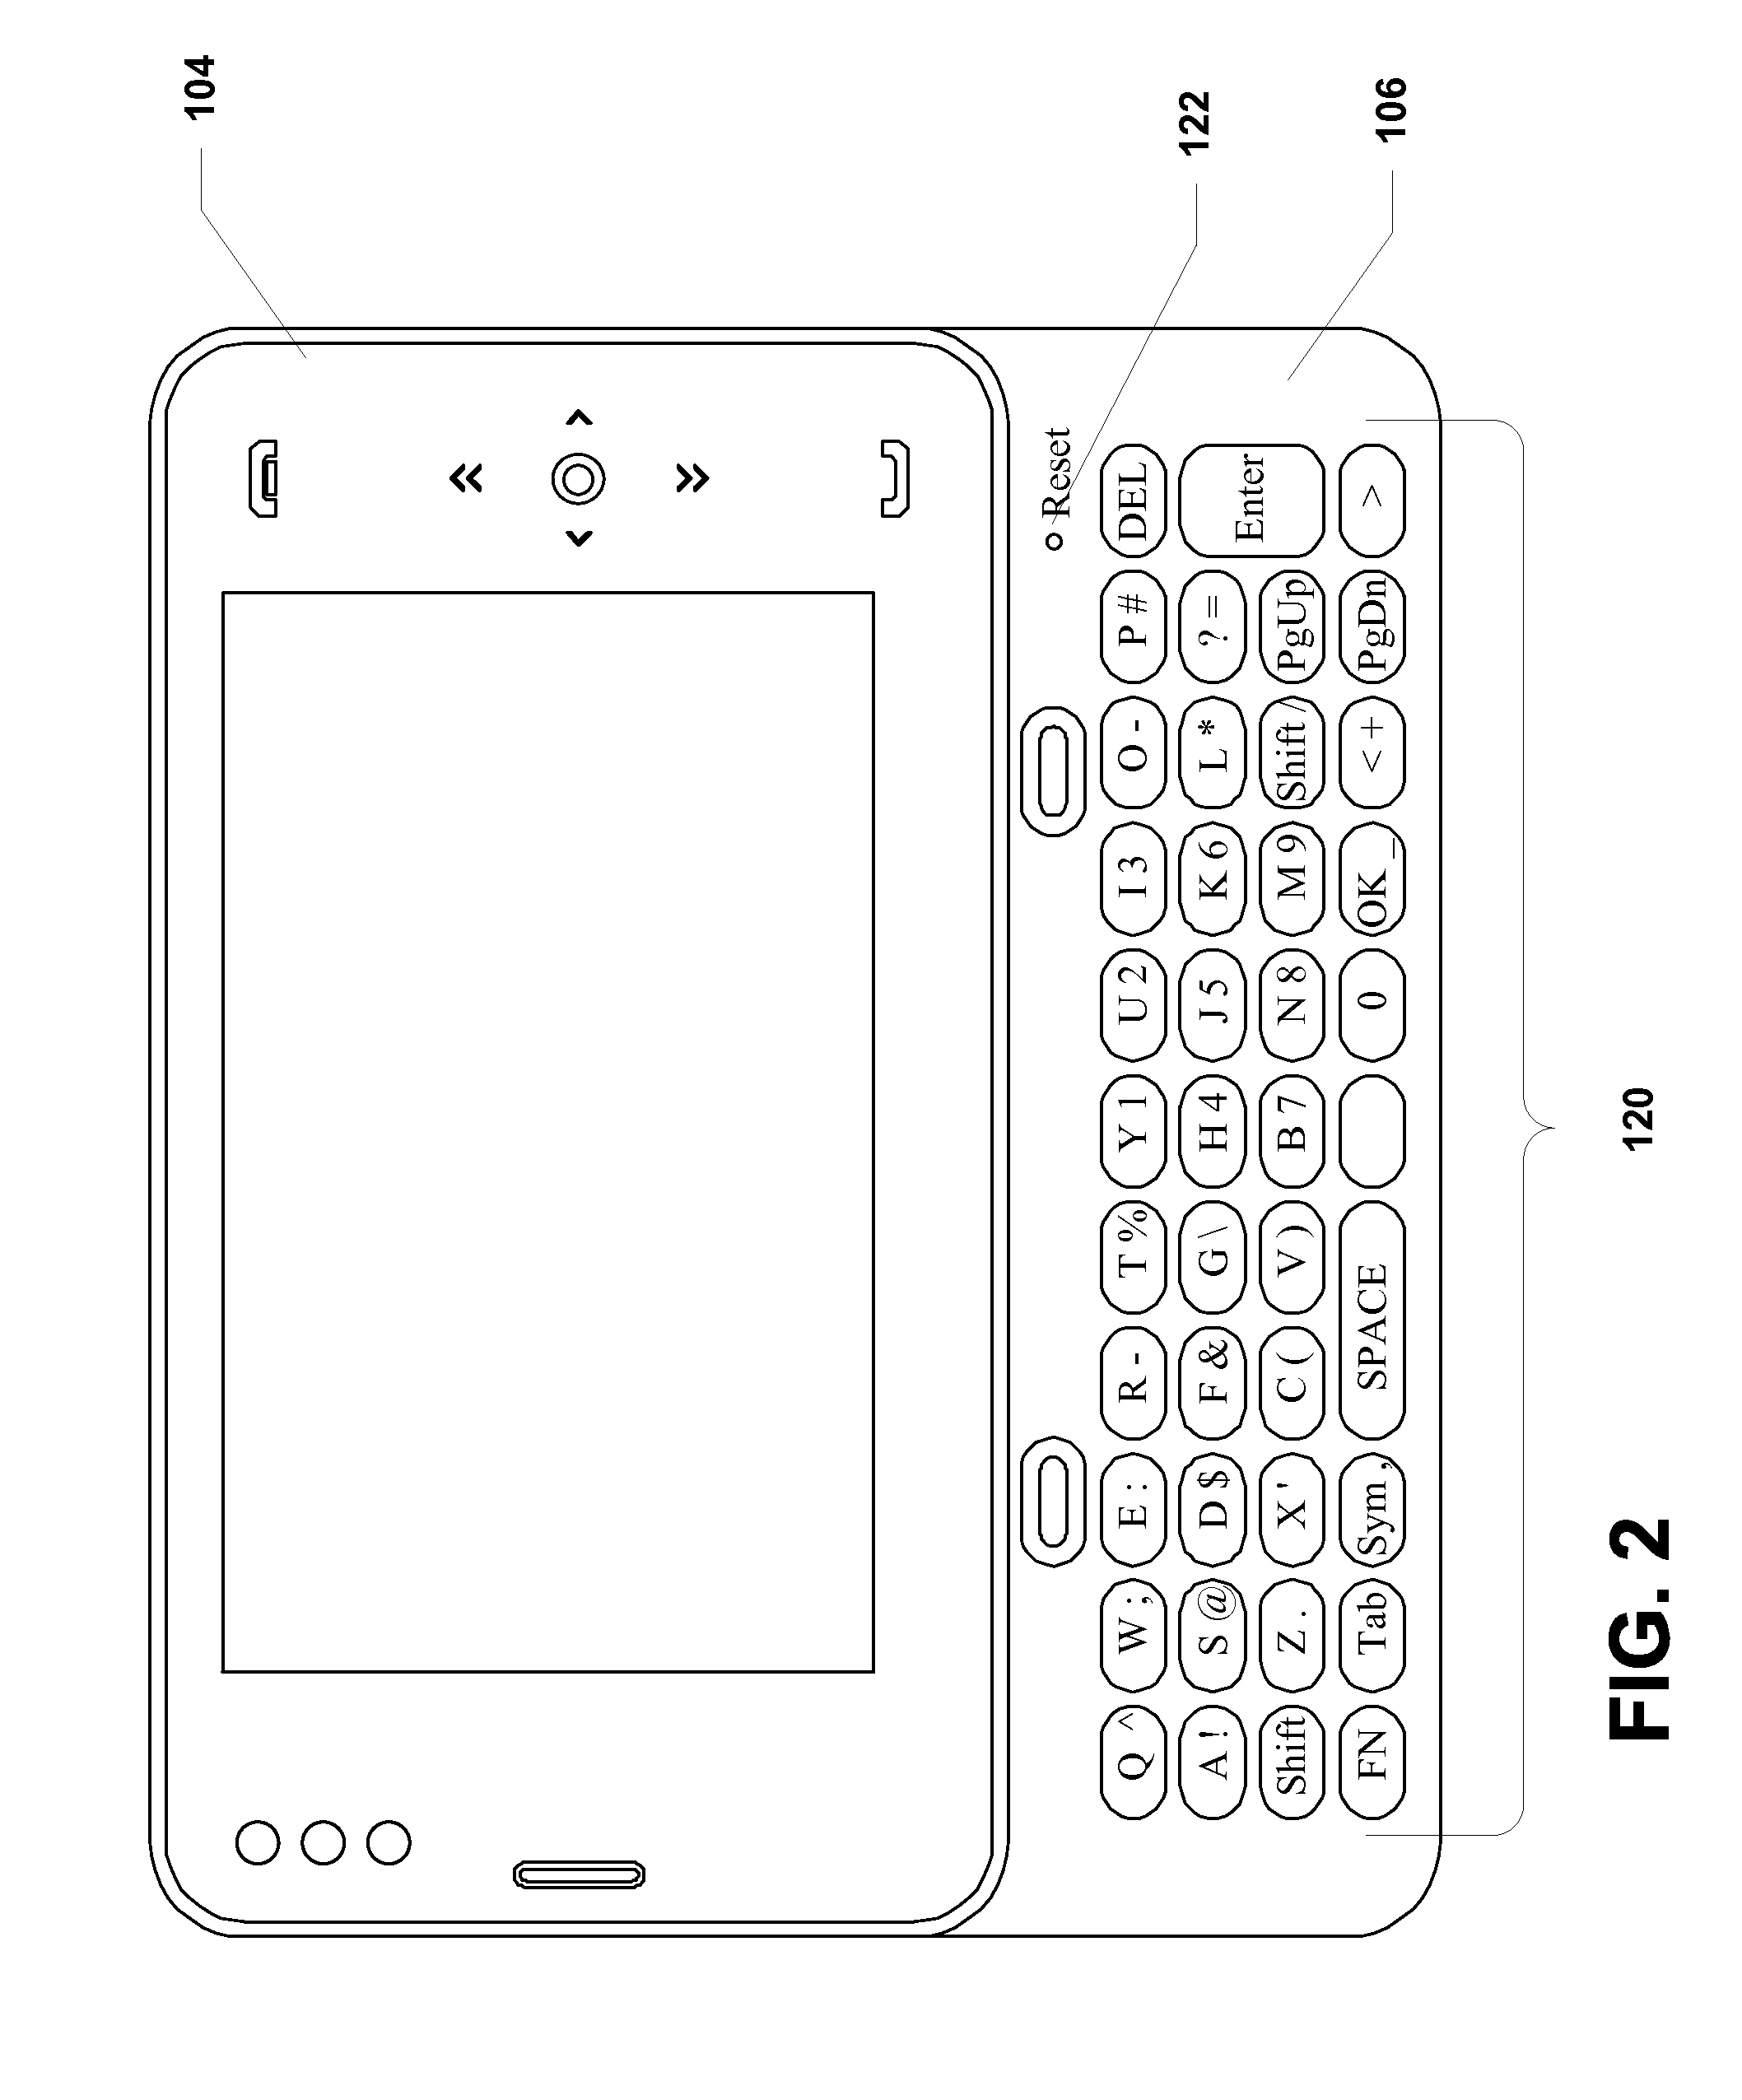 System and method of executing threads at a processor